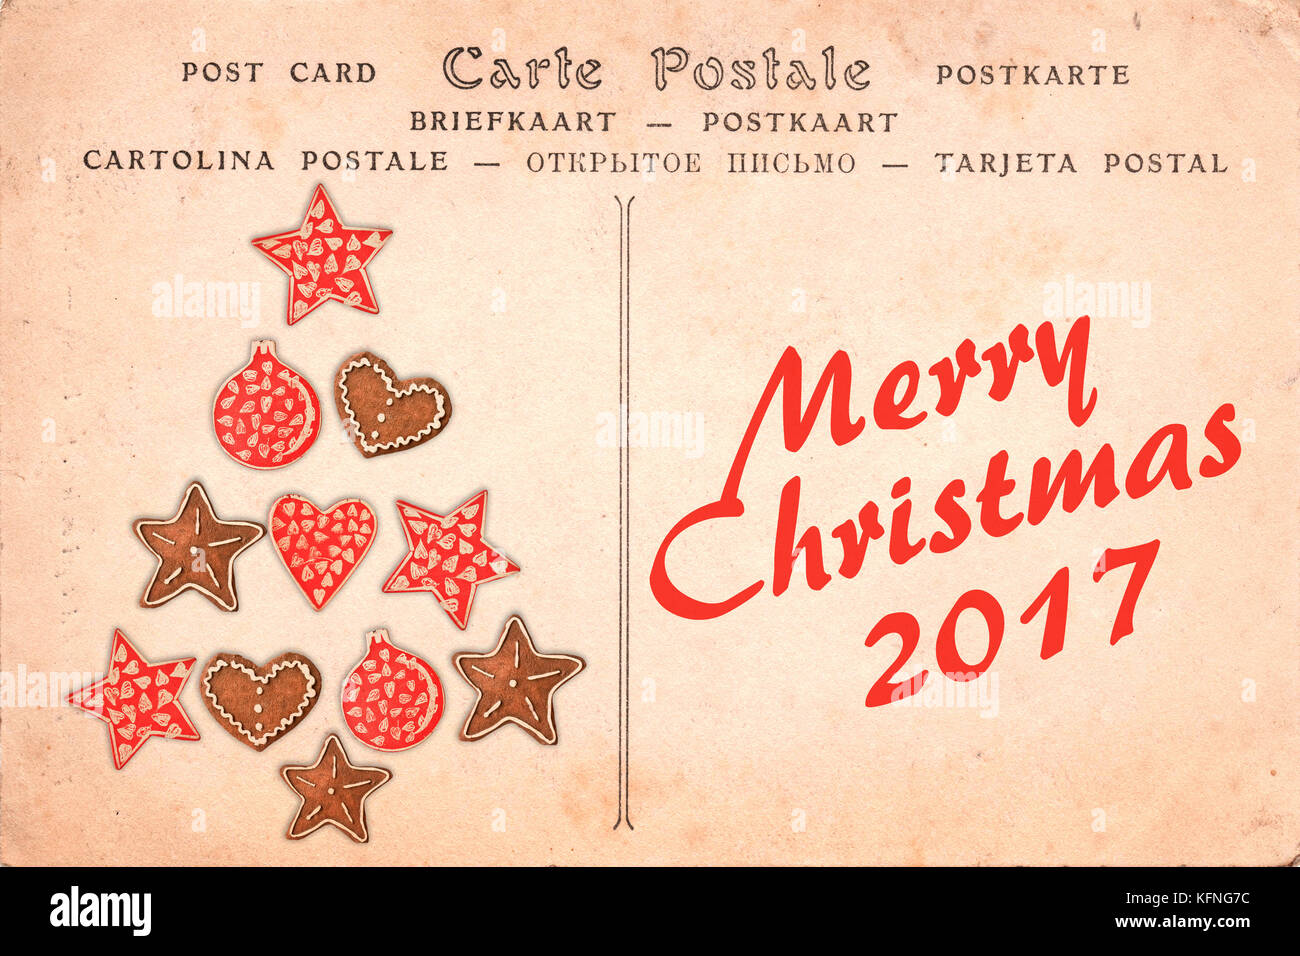 Merry Christmas 2017 on a vintage postcard background Stock Photo